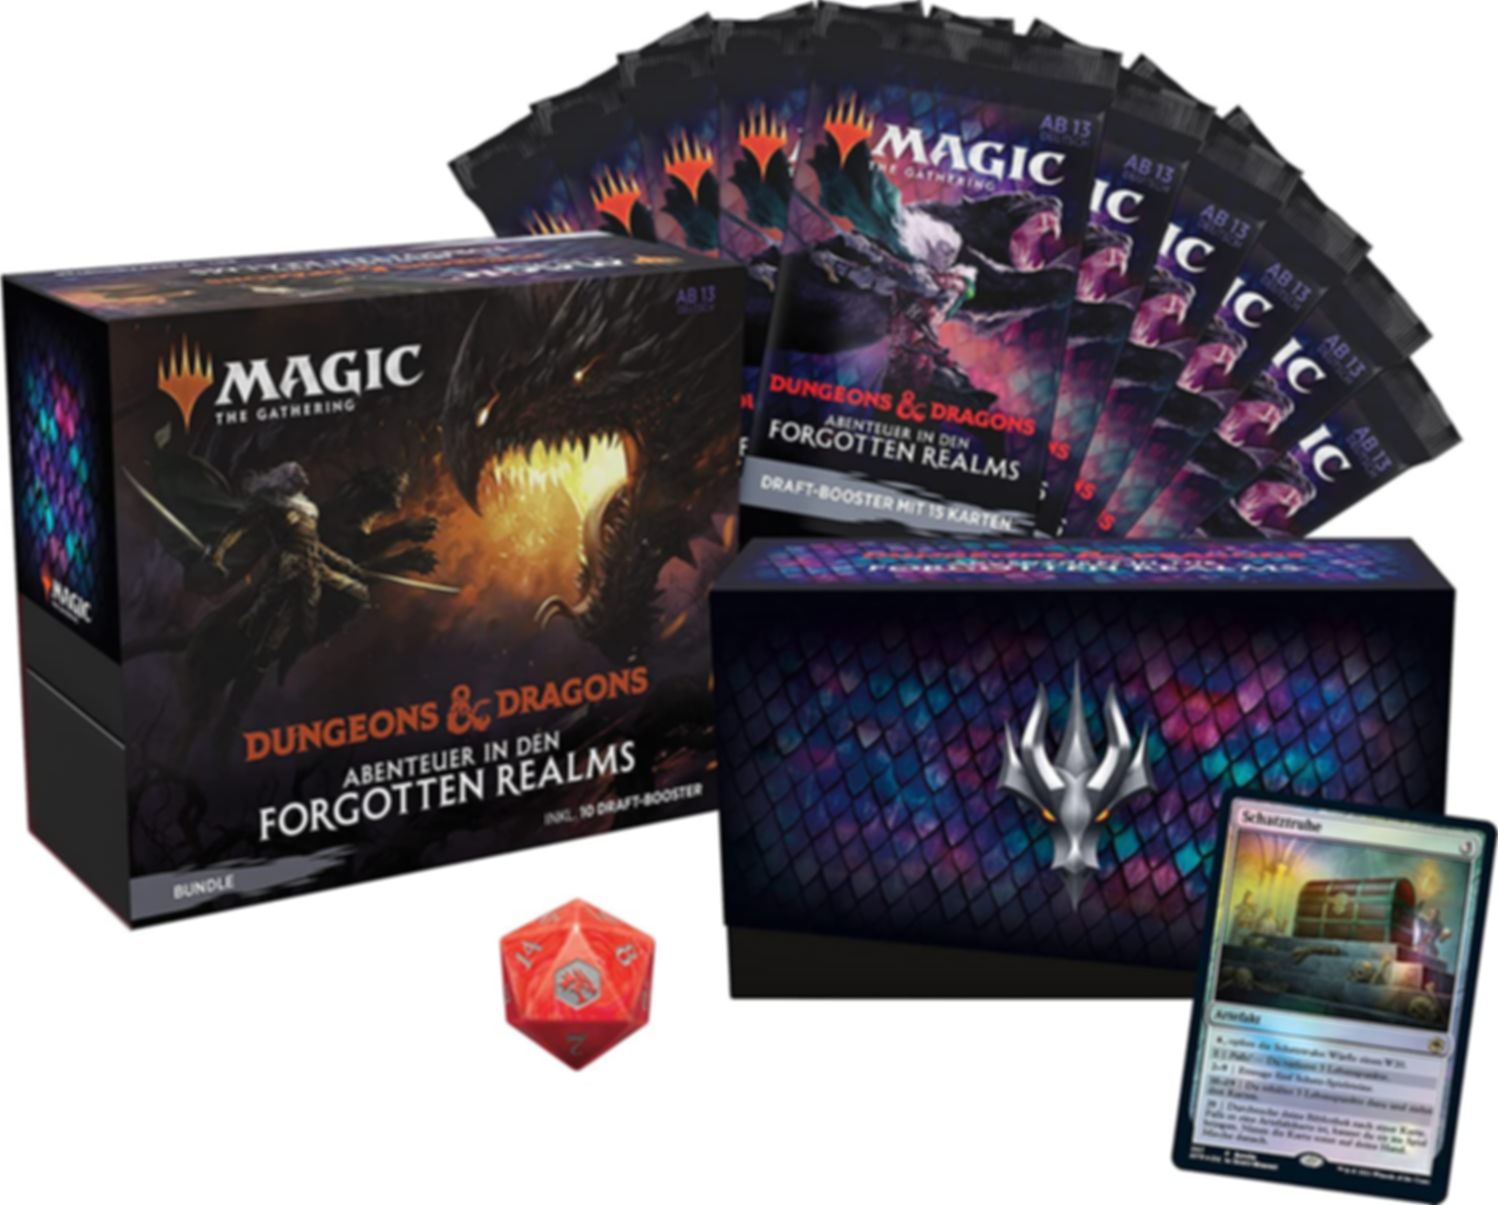 Magic The Gathering: Adventures in the Forgotten Realms Bundle components